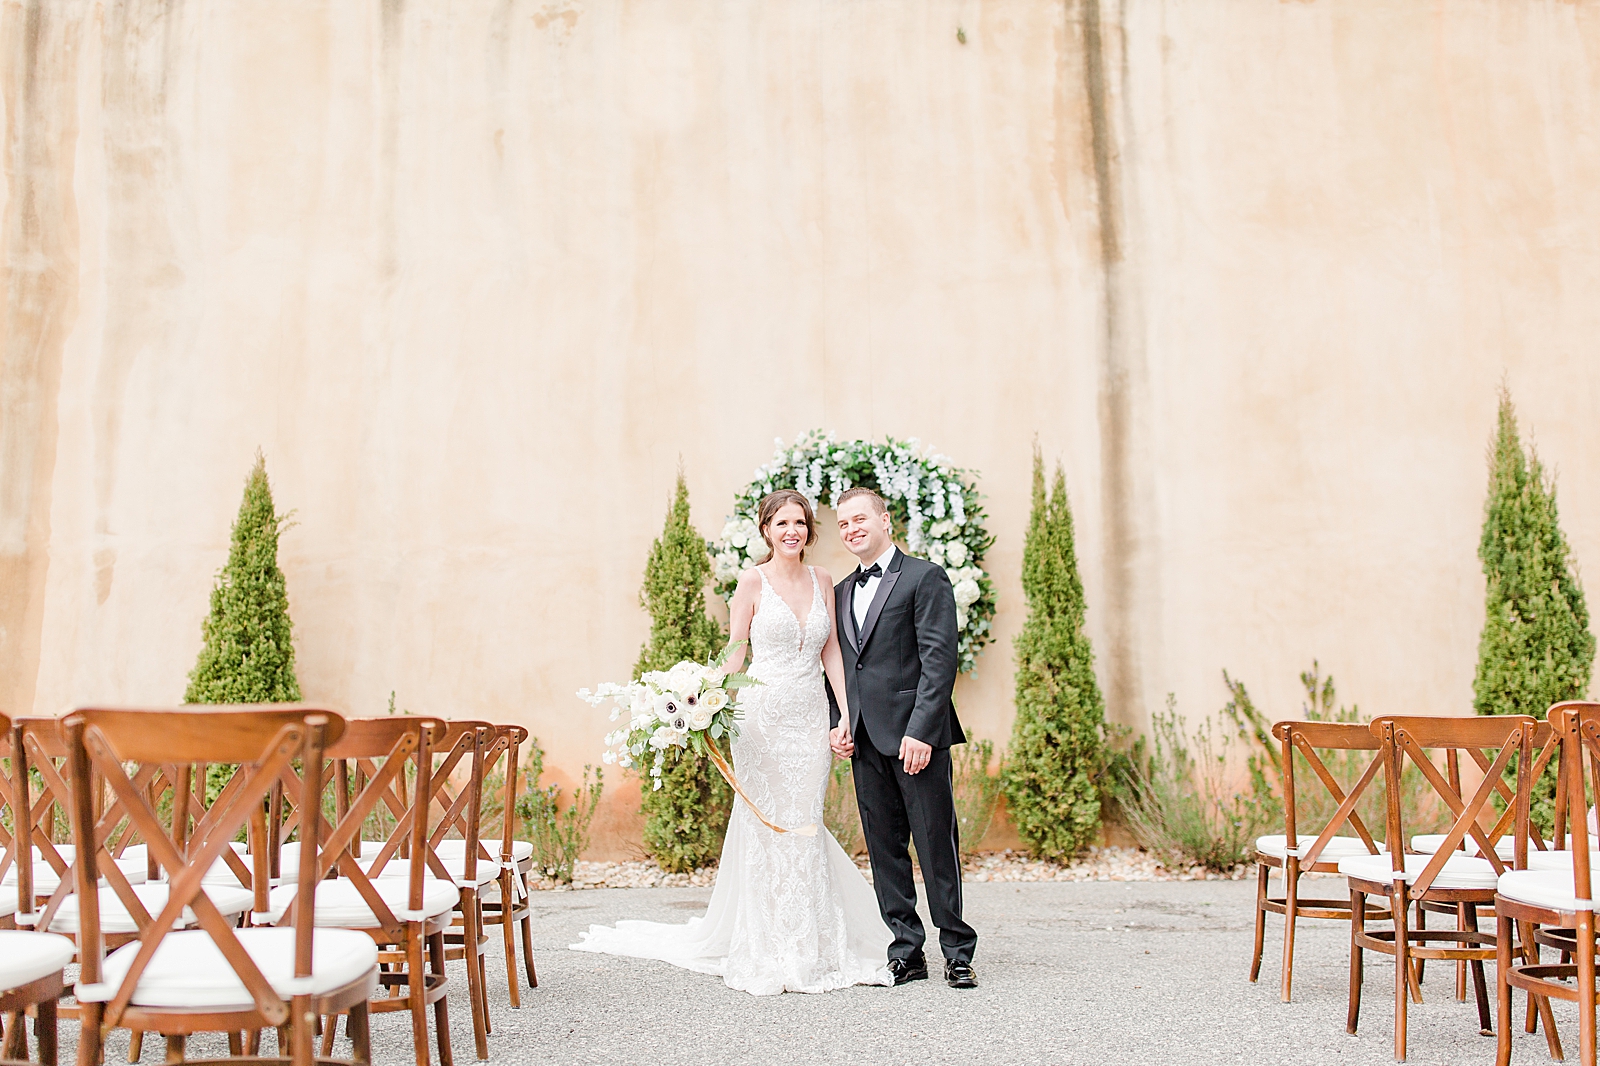 Montaluce Winery Wedding Ceremony Bride and Groom Laughing Walking Down Aisle Photo